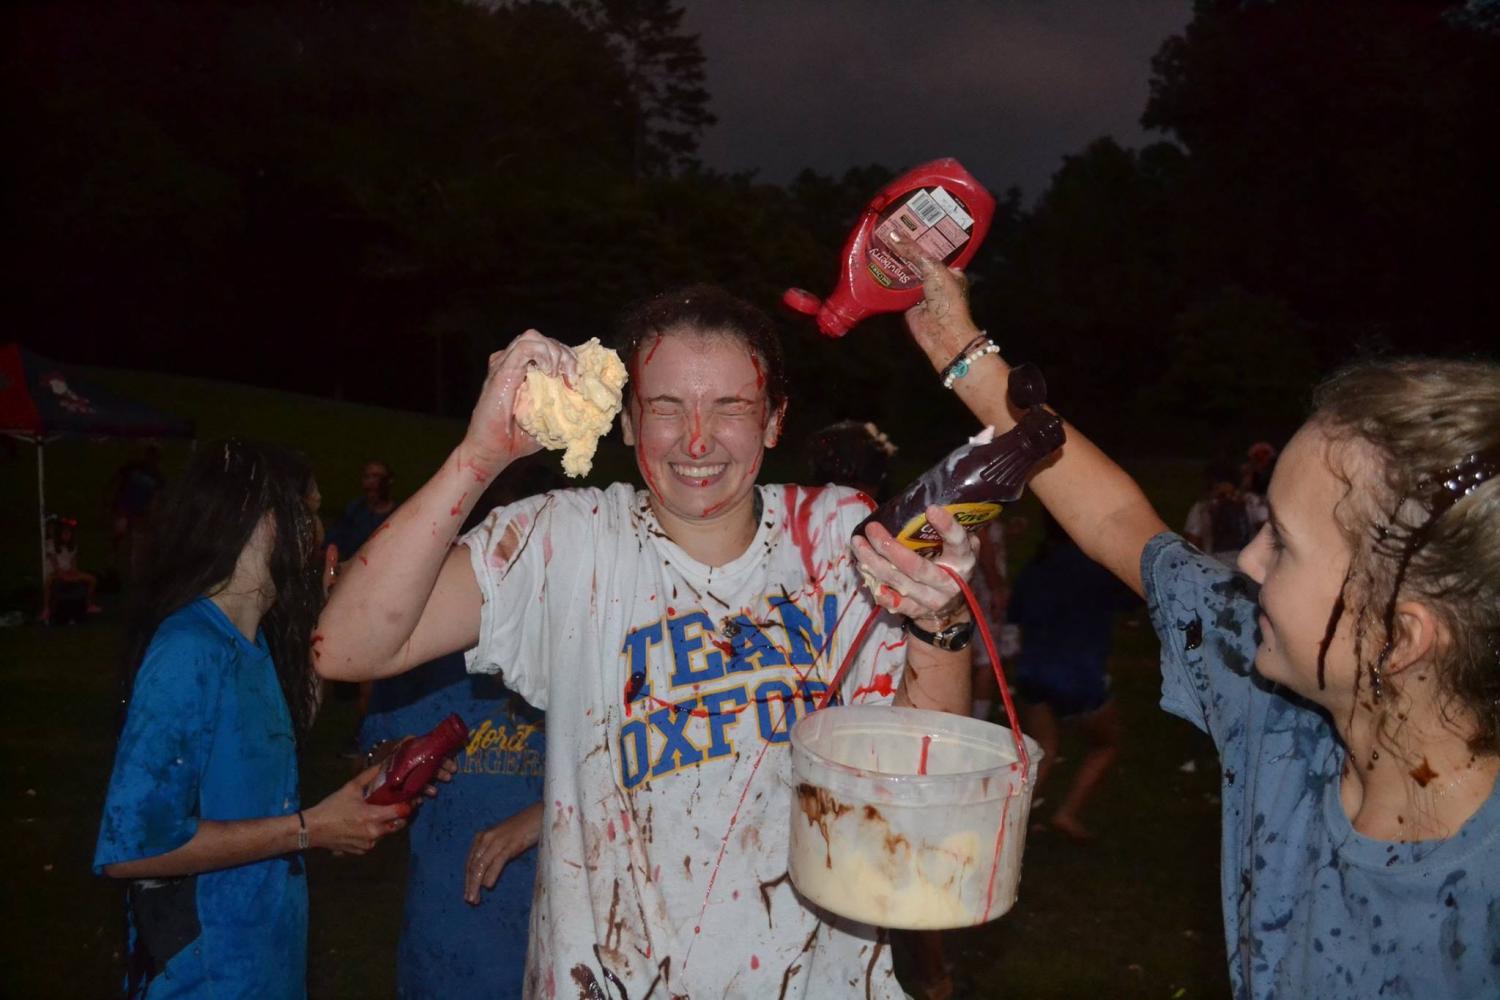 Junior Taylor Daniel squirts senior Lily Mitchell with syrup during the ice cream olympics on Aug. 17 hosted by Oxford Younglife.